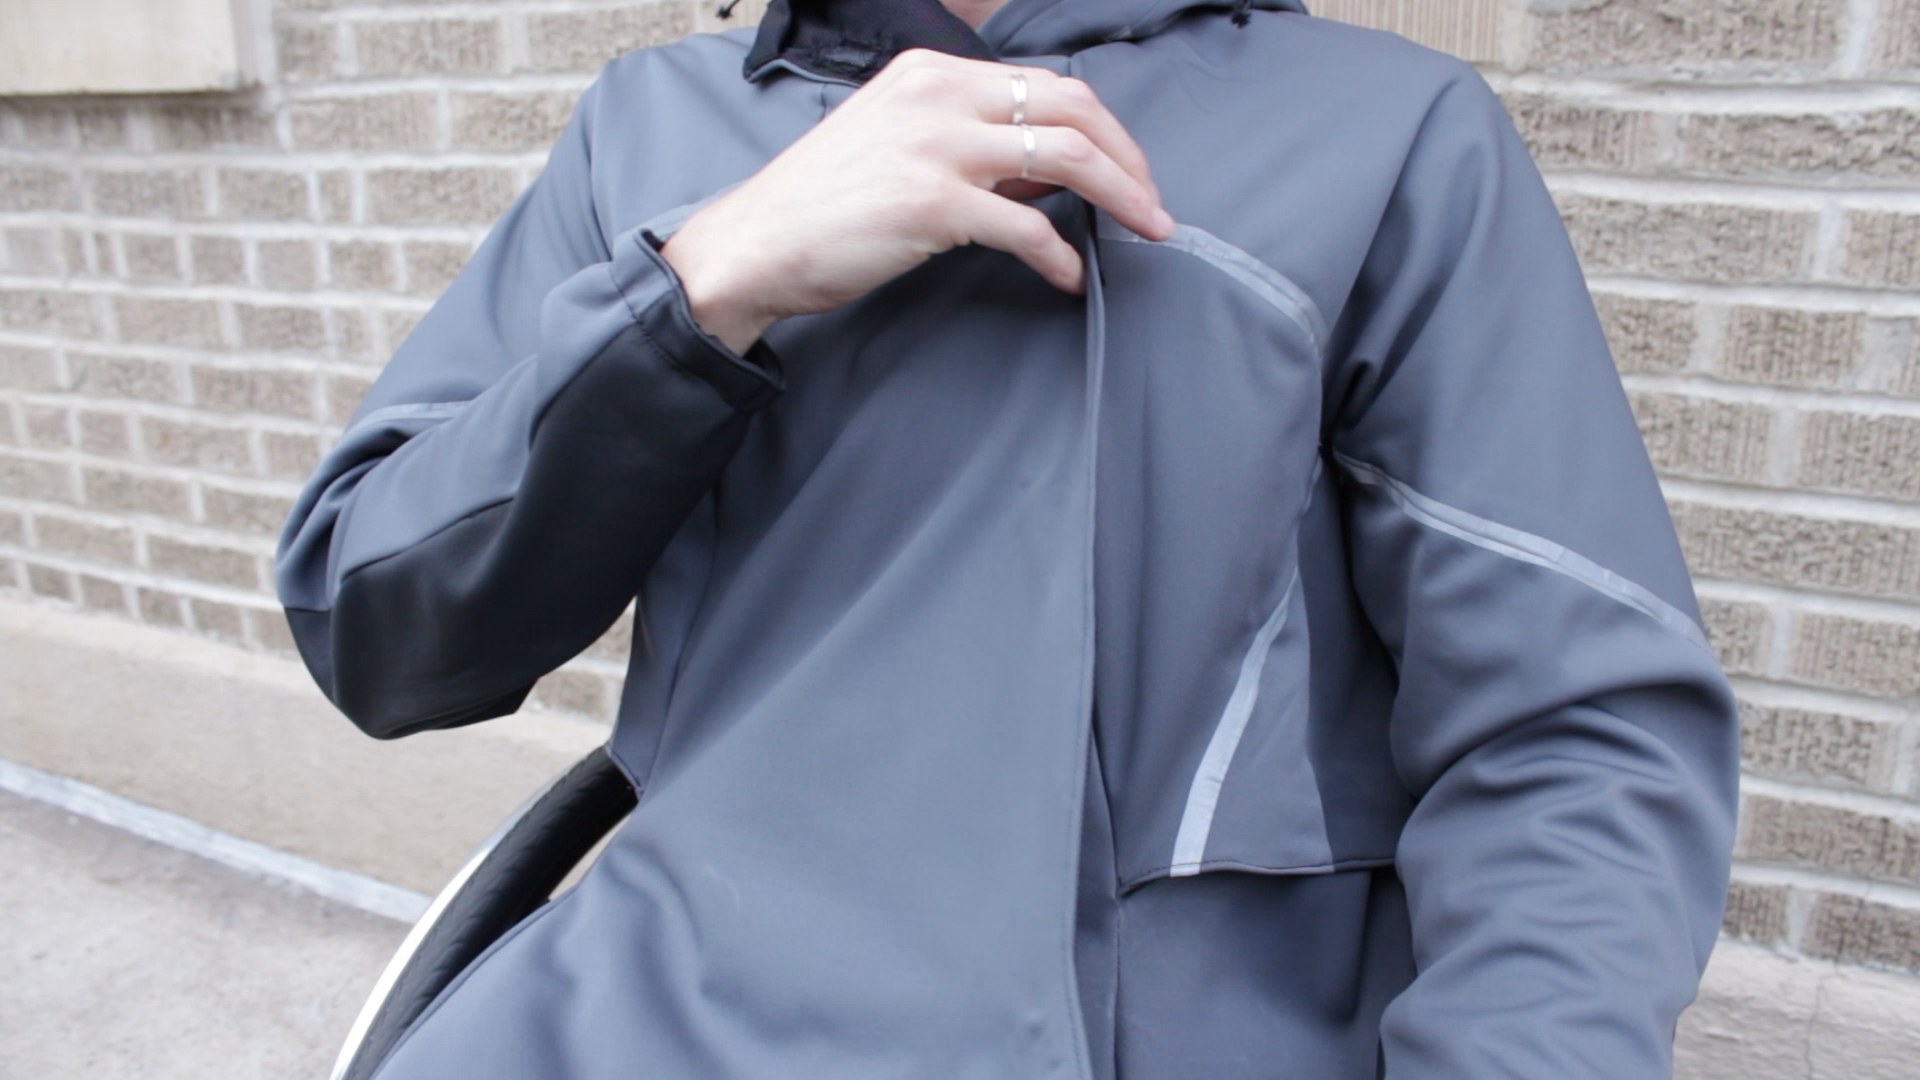 Photo of April closing the jacket. The jacket is grey, the seams have a grey reflective fabric and the back part of the sleeves is made of black leather.